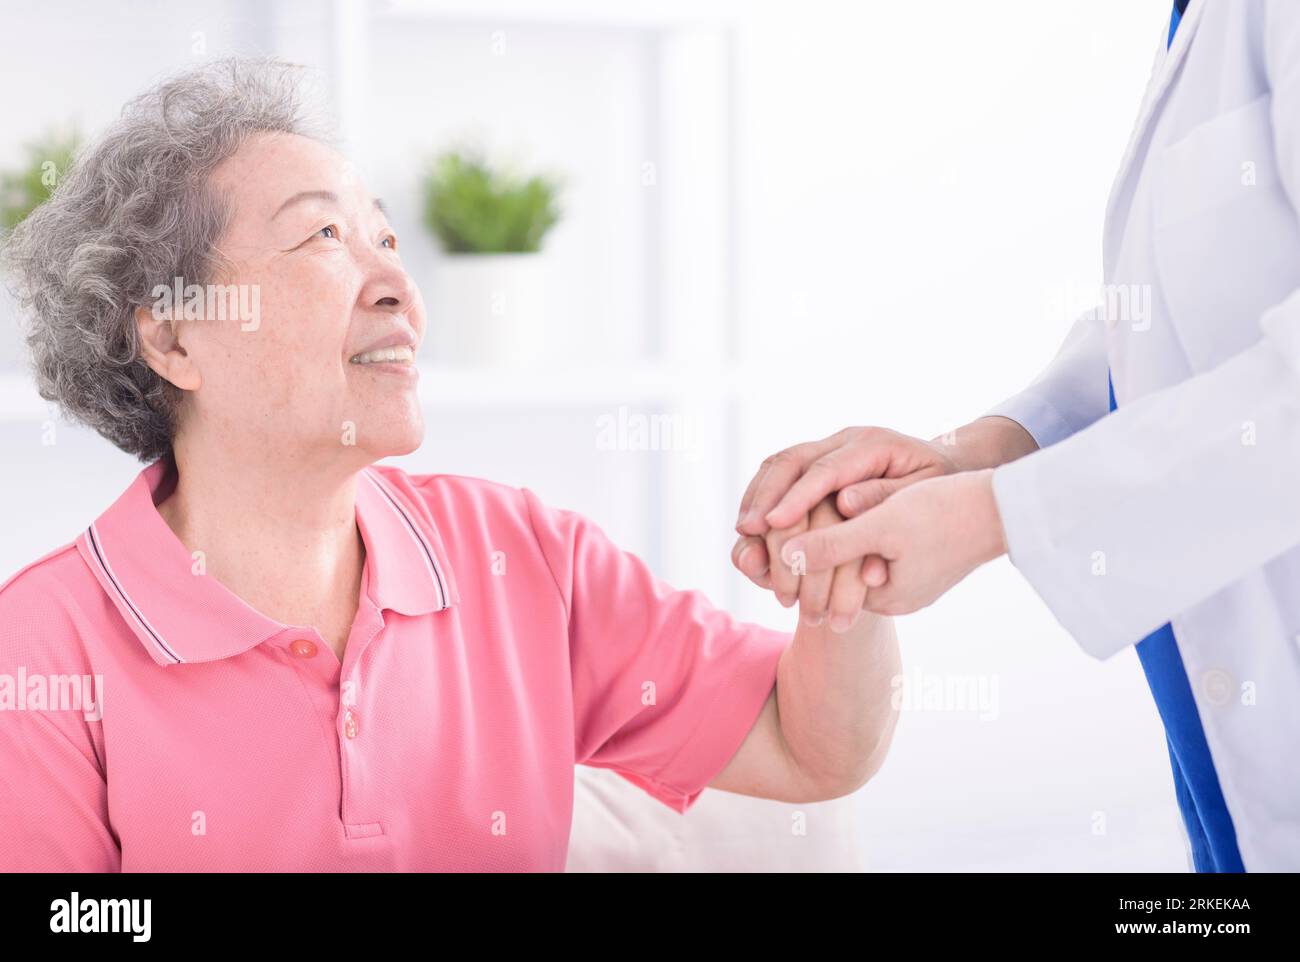 physician leaning forward to smiling elderly lady patient holding her hand in palms. Woman caretaker in white coat supporting encouraging old person Stock Photo